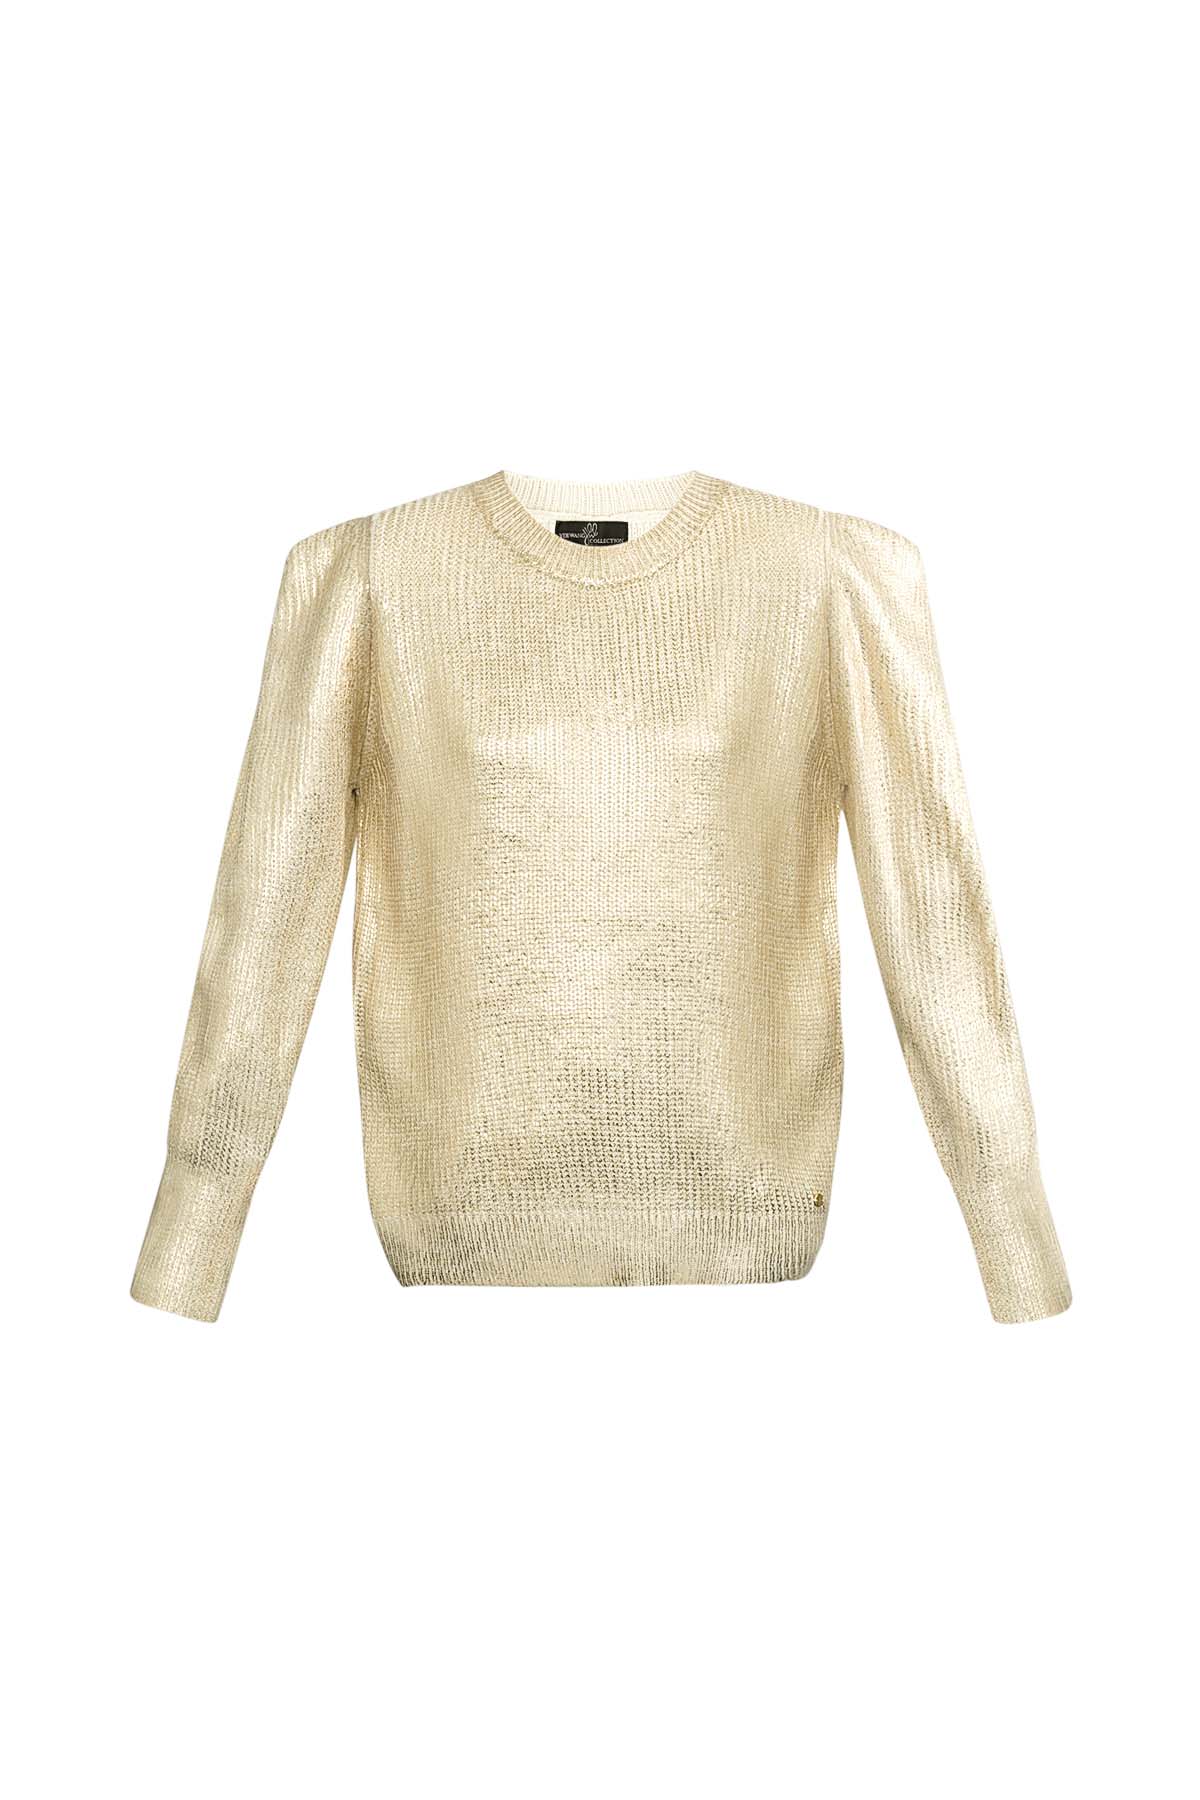 Knitted metallic city sweater - gold 